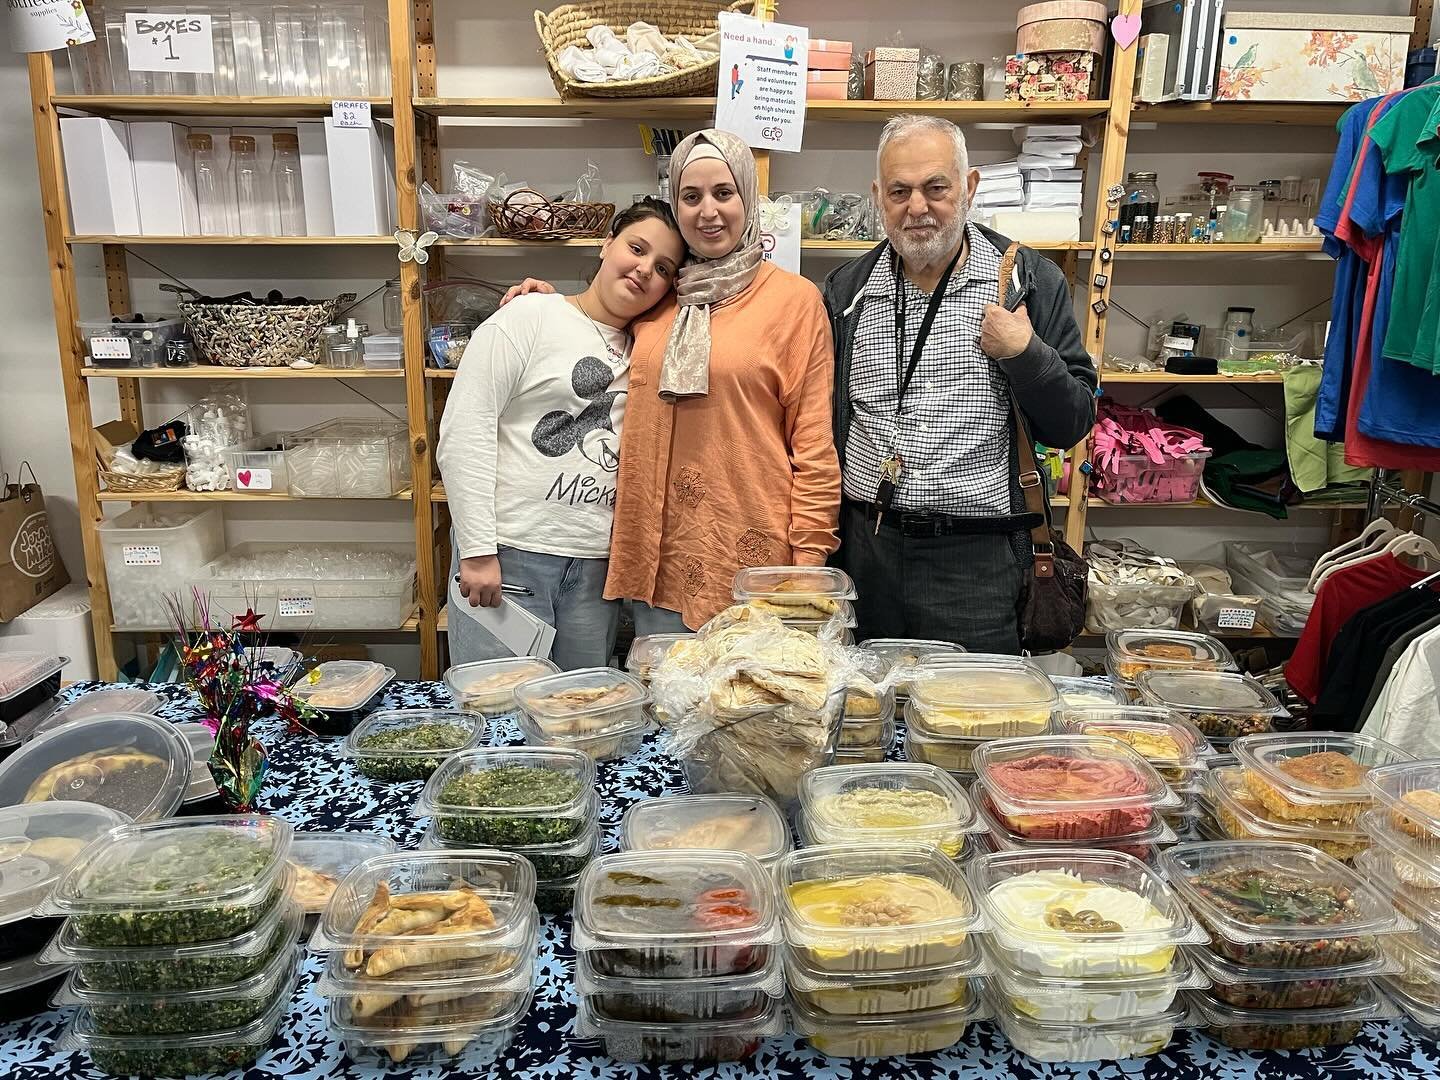 Alaa is here with incredibly delicious Syrian food! 

Our market is open from 2-4pm!